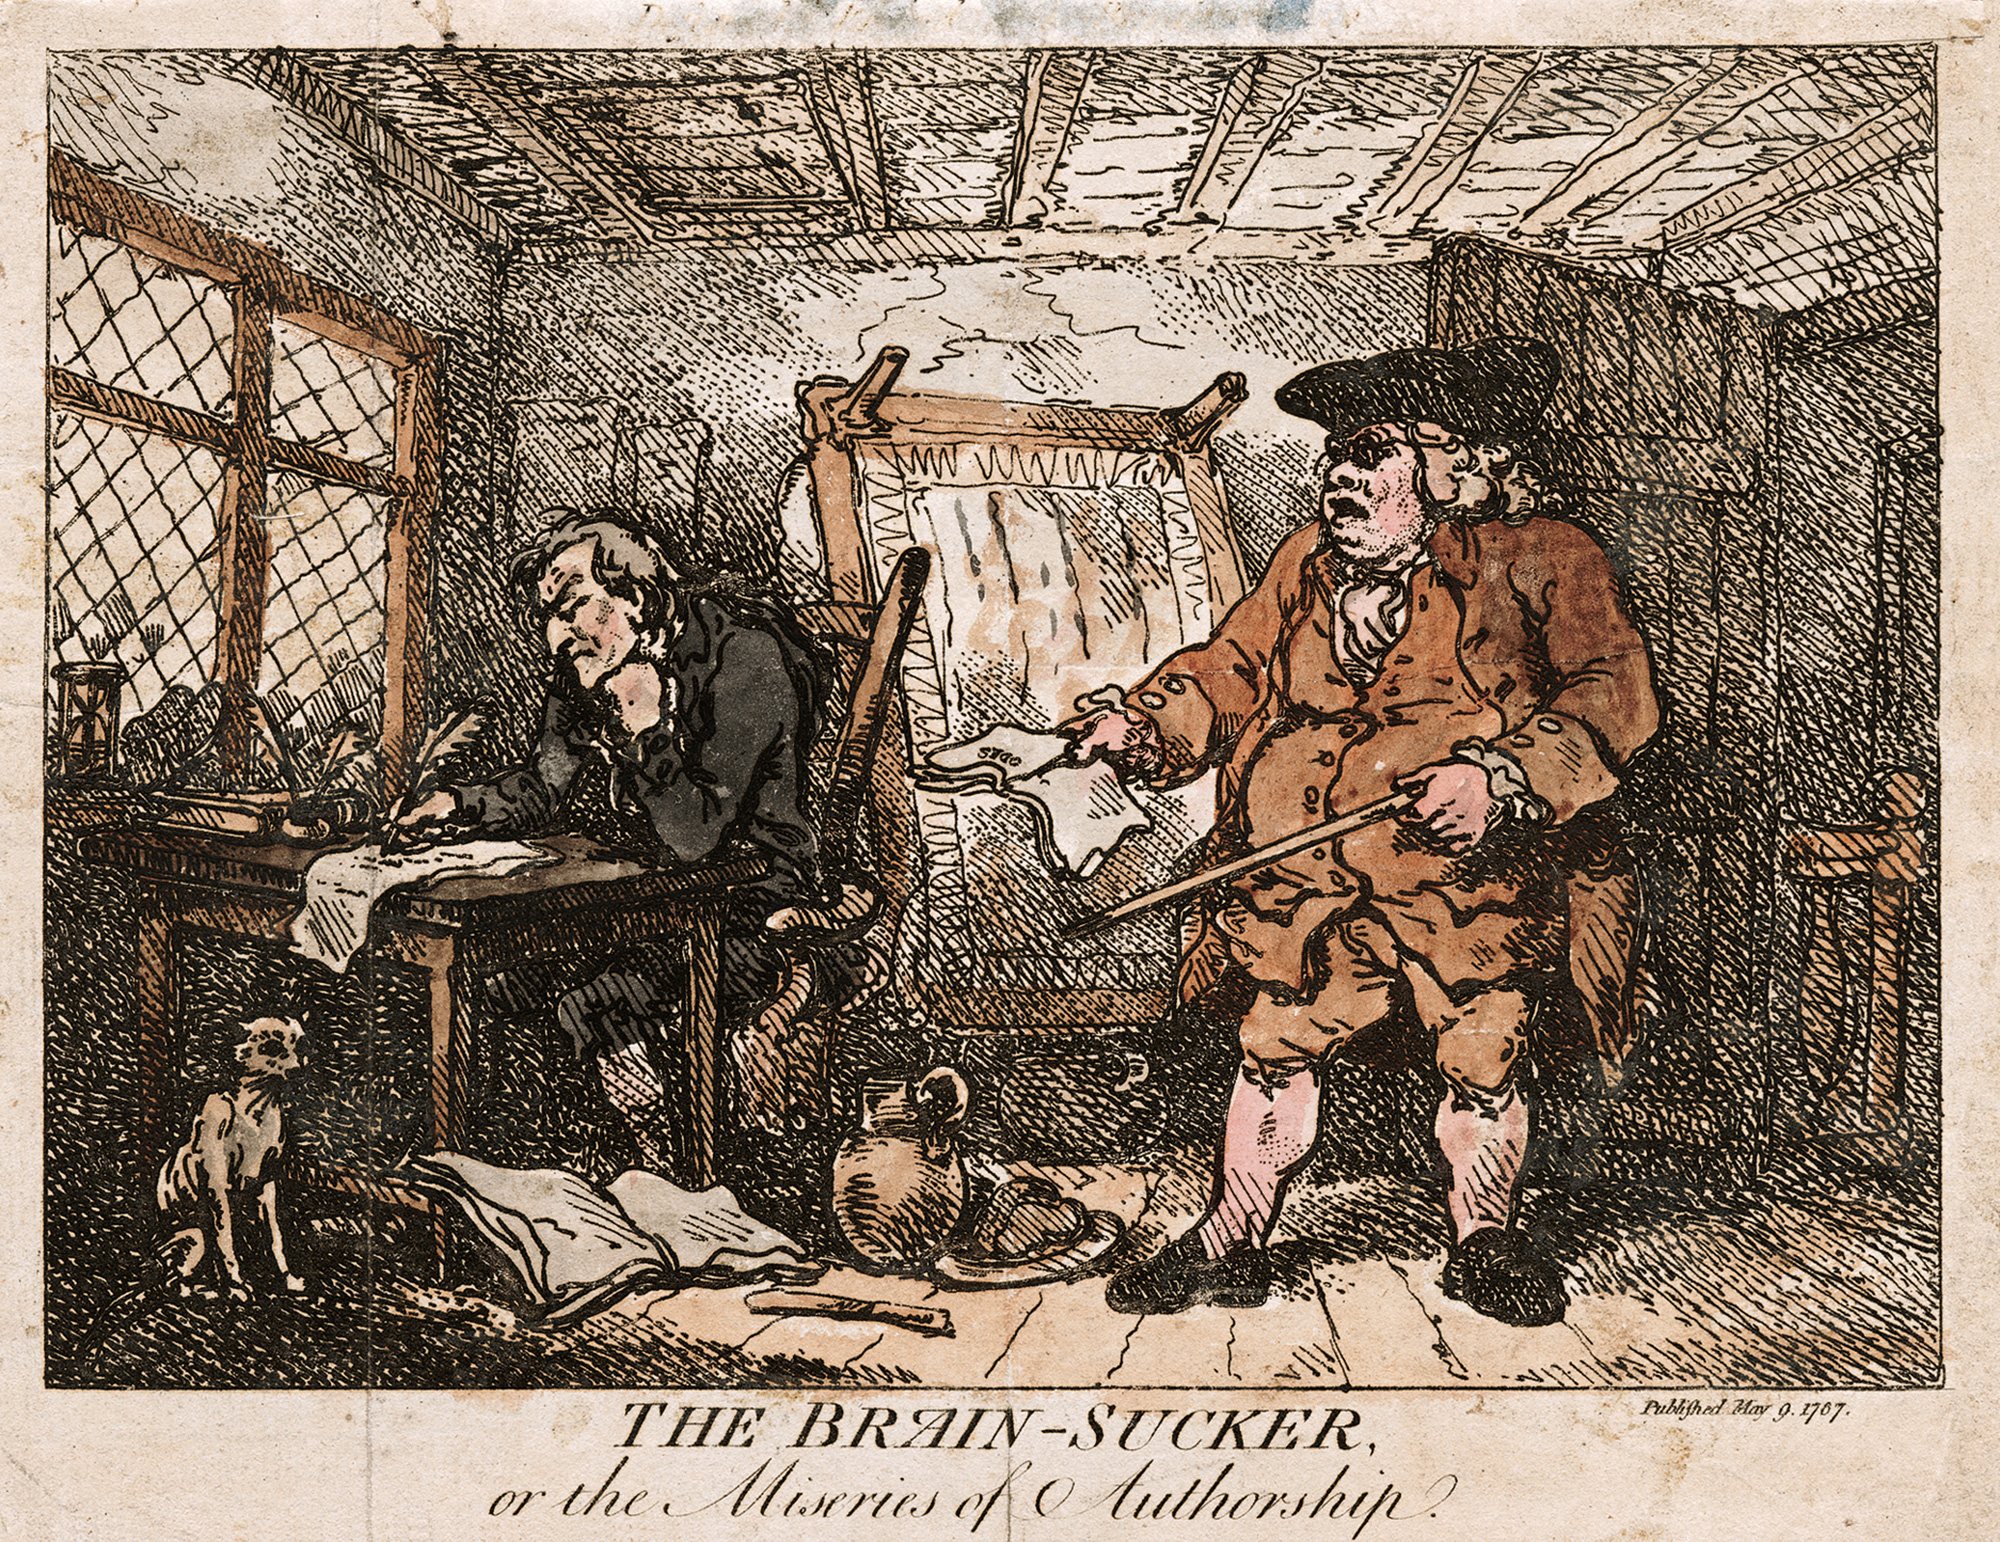 A colored print titled “The Brain-Sucker, or the Miseries of Authorship,” showing a writer interrupted by a portly man. 